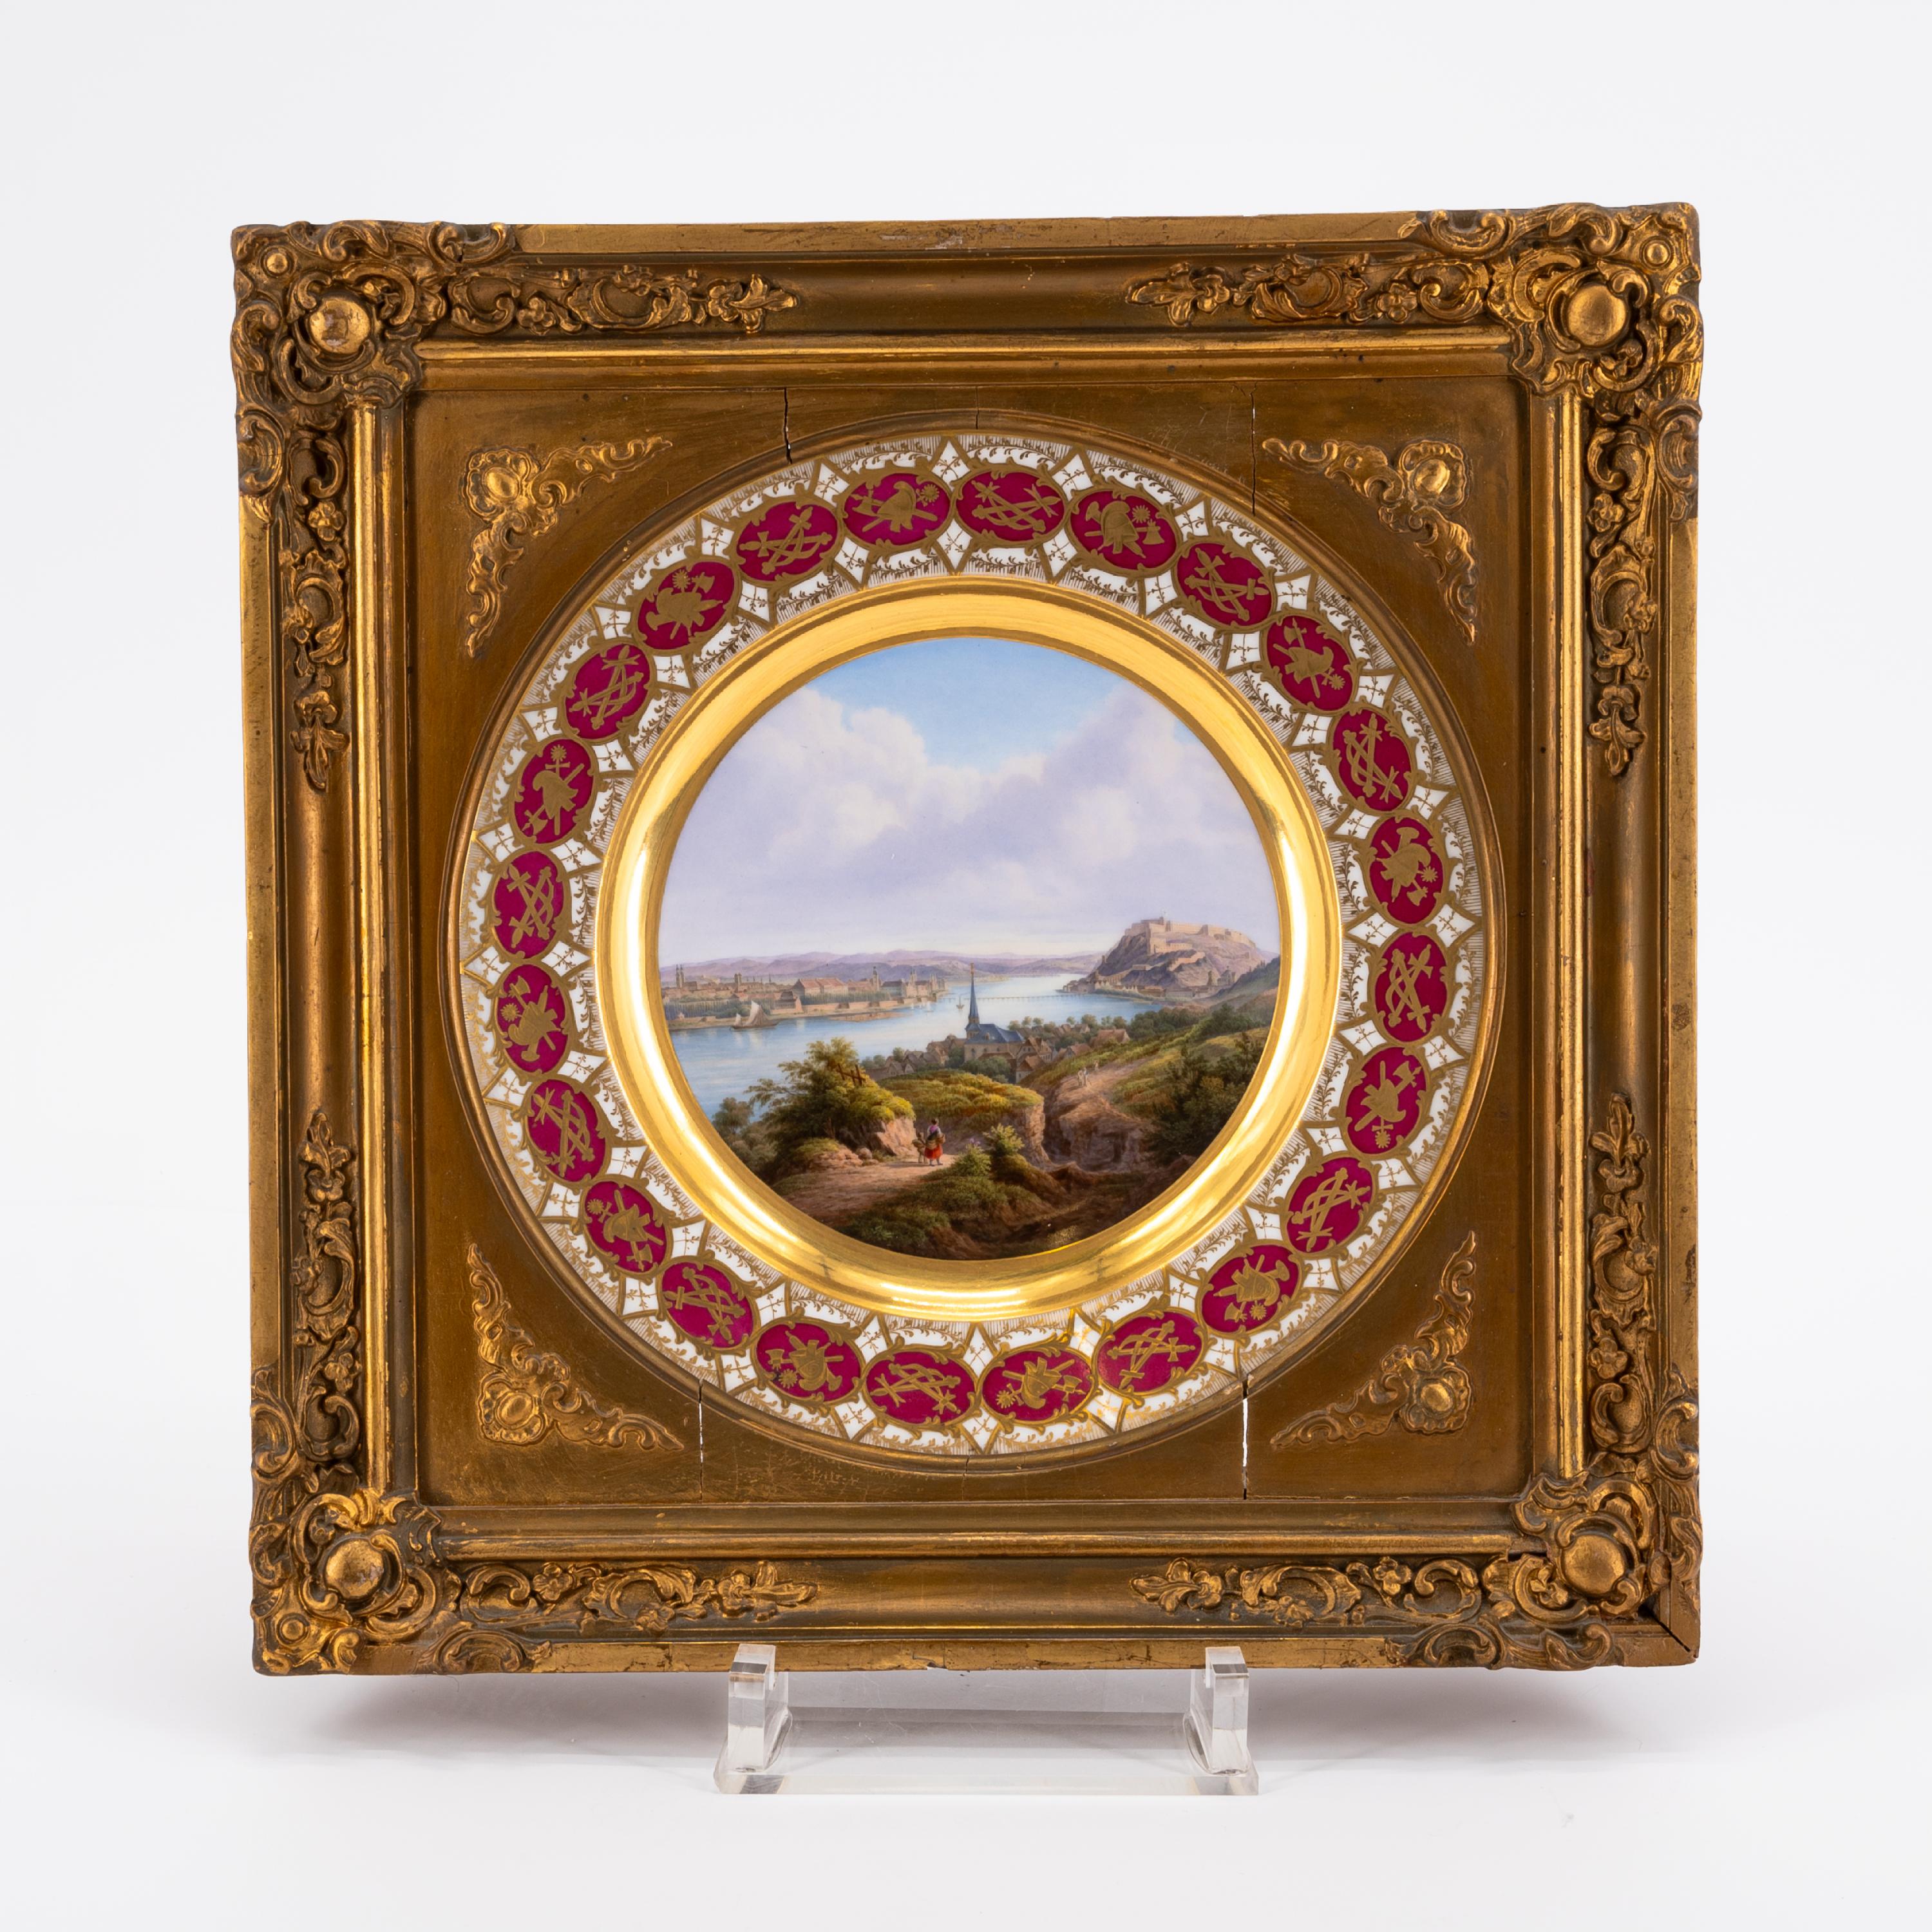 EXEPTIONAL SERIES OF TWELVE PORCELAIN PLATES WITH ROMANTIC VIEWS OF THE RHINE - Image 15 of 26